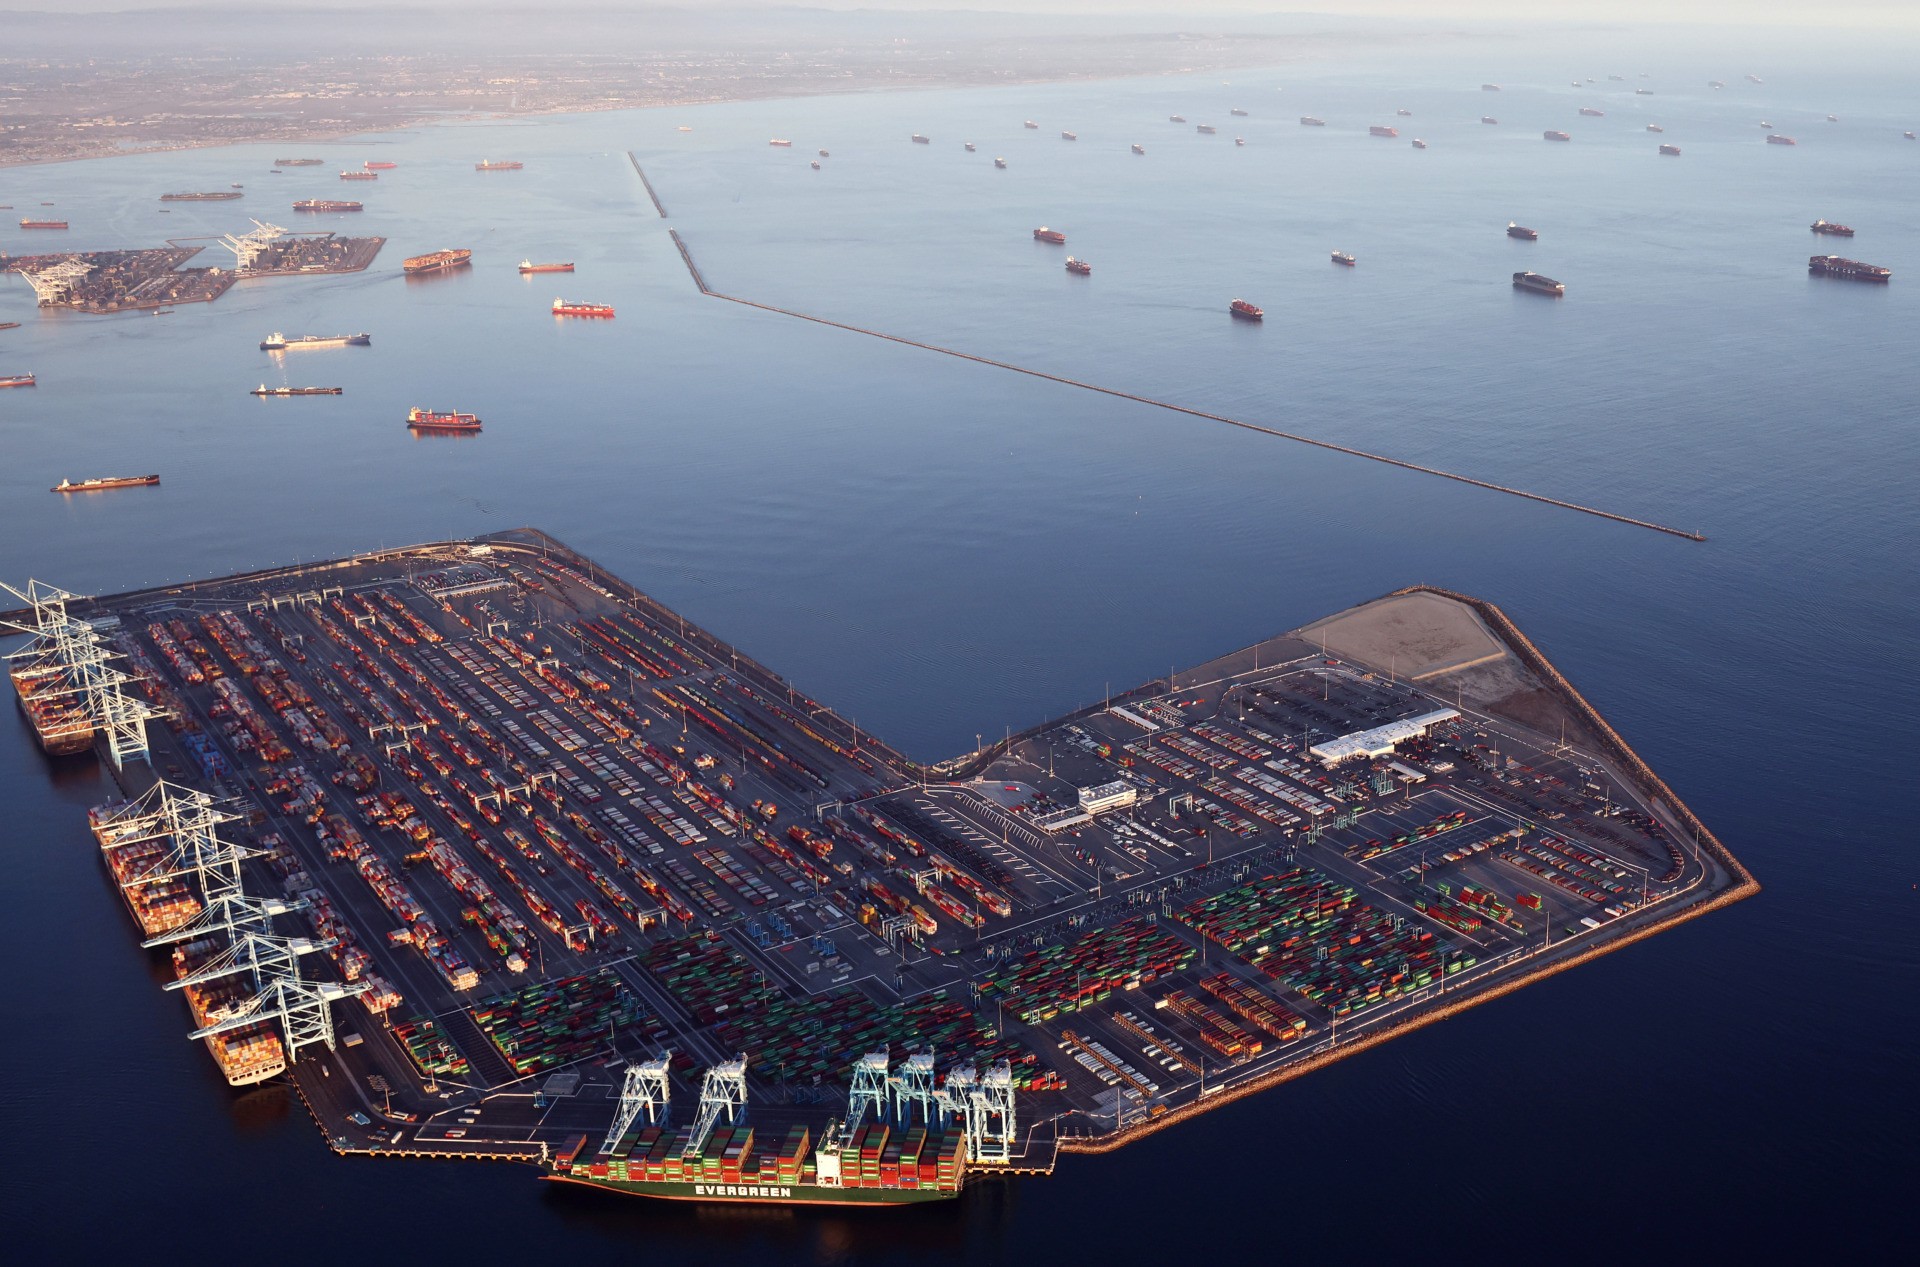 LOS ANGELES, CALIFORNIA - SEPTEMBER 20: In an aerial view, container ships (Top R) are anchored by the ports of Long Beach and Los Angeles as they wait to offload on September 20, 2021 near Los Angeles, California. Amid a record-high demand for imported goods and a shortage of shipping containers and truckers, the twin ports are currently seeing unprecedented congestion. On September 17, there were a record total of 147 ships, 95 of which were container ships, in the twin ports, which move about 40 percent of all cargo containers entering the U.S. (Photo by Mario Tama/Getty Images)